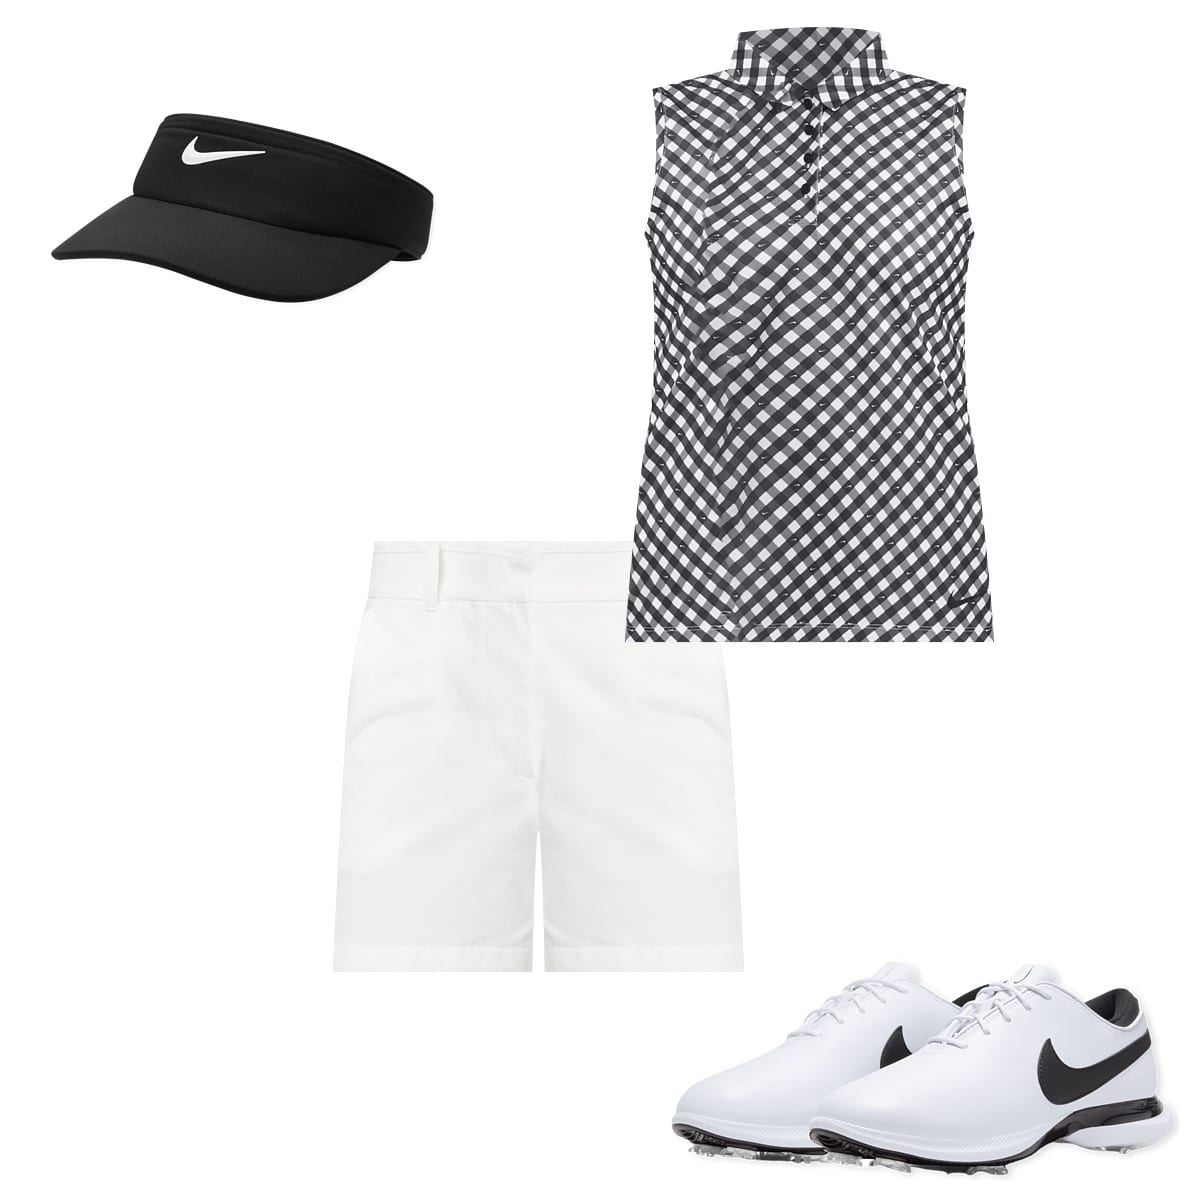 5 Golf Outfits for Women.